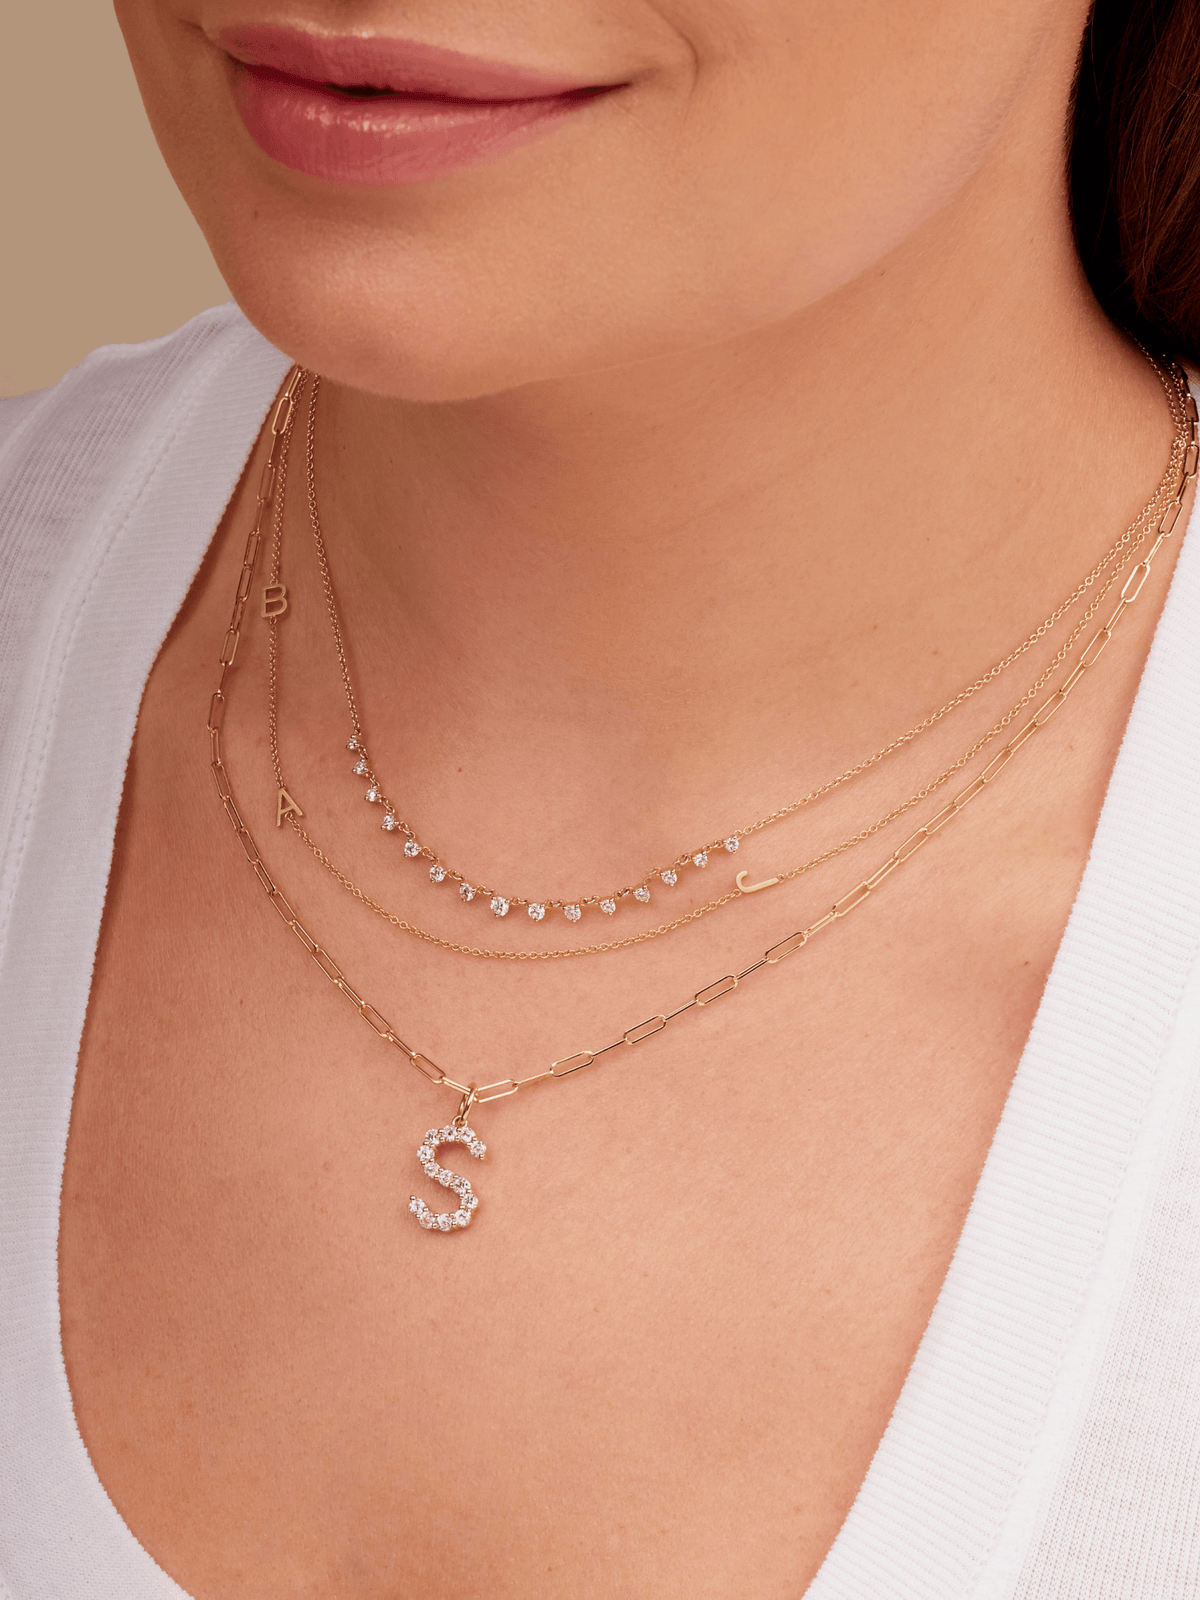 14K gold large diamond initial charm on dainty gold paperclip necklace layered with diamond layering necklace and gold charm initial necklace